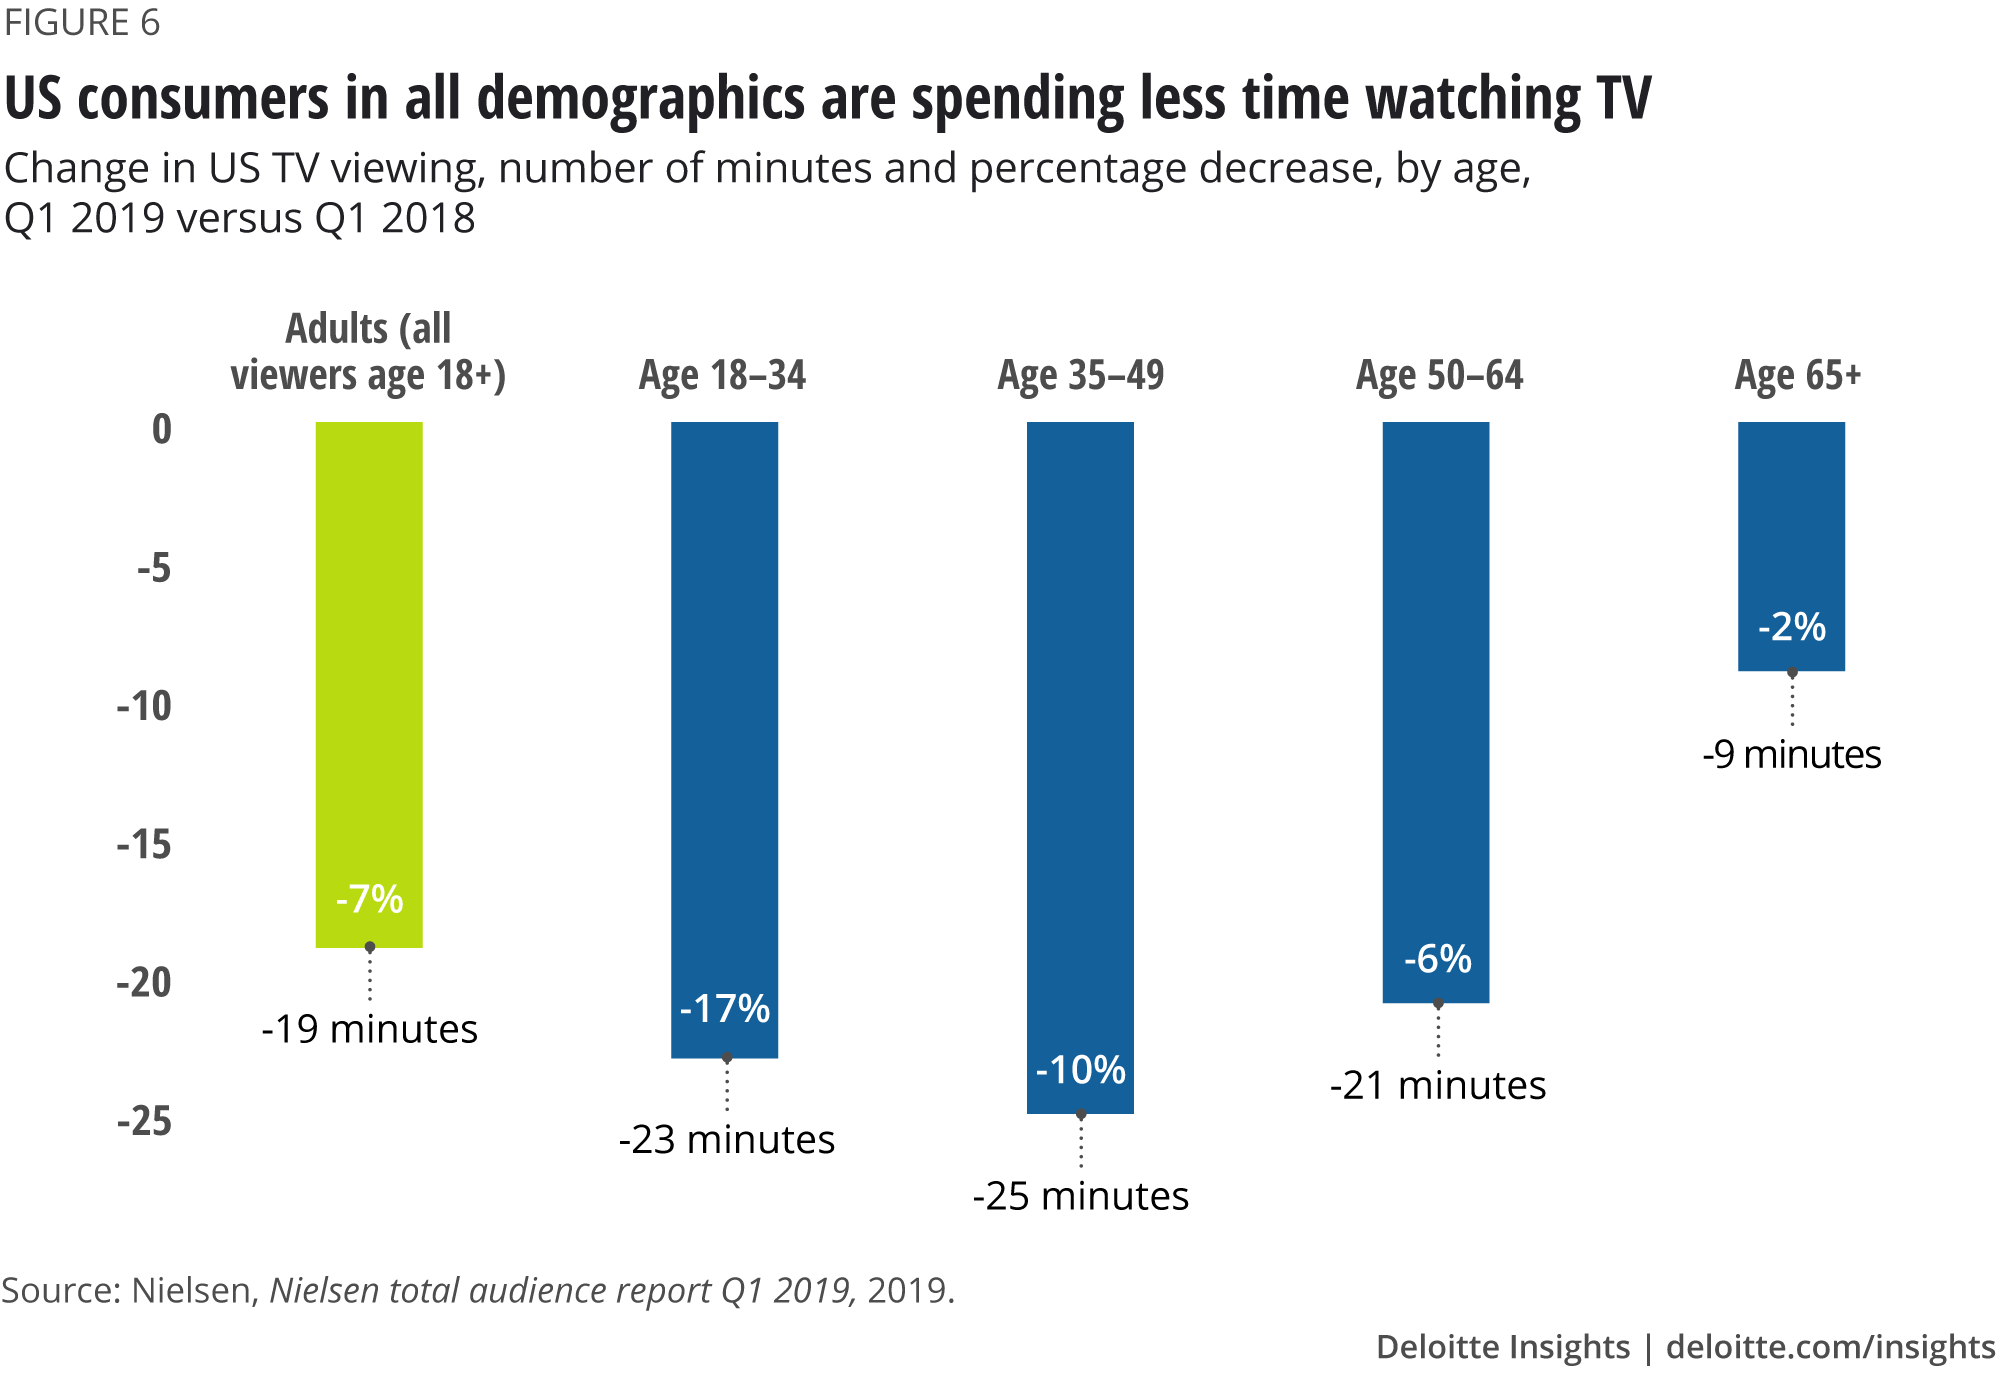 US consumers in all demographics are spending less time watching TV